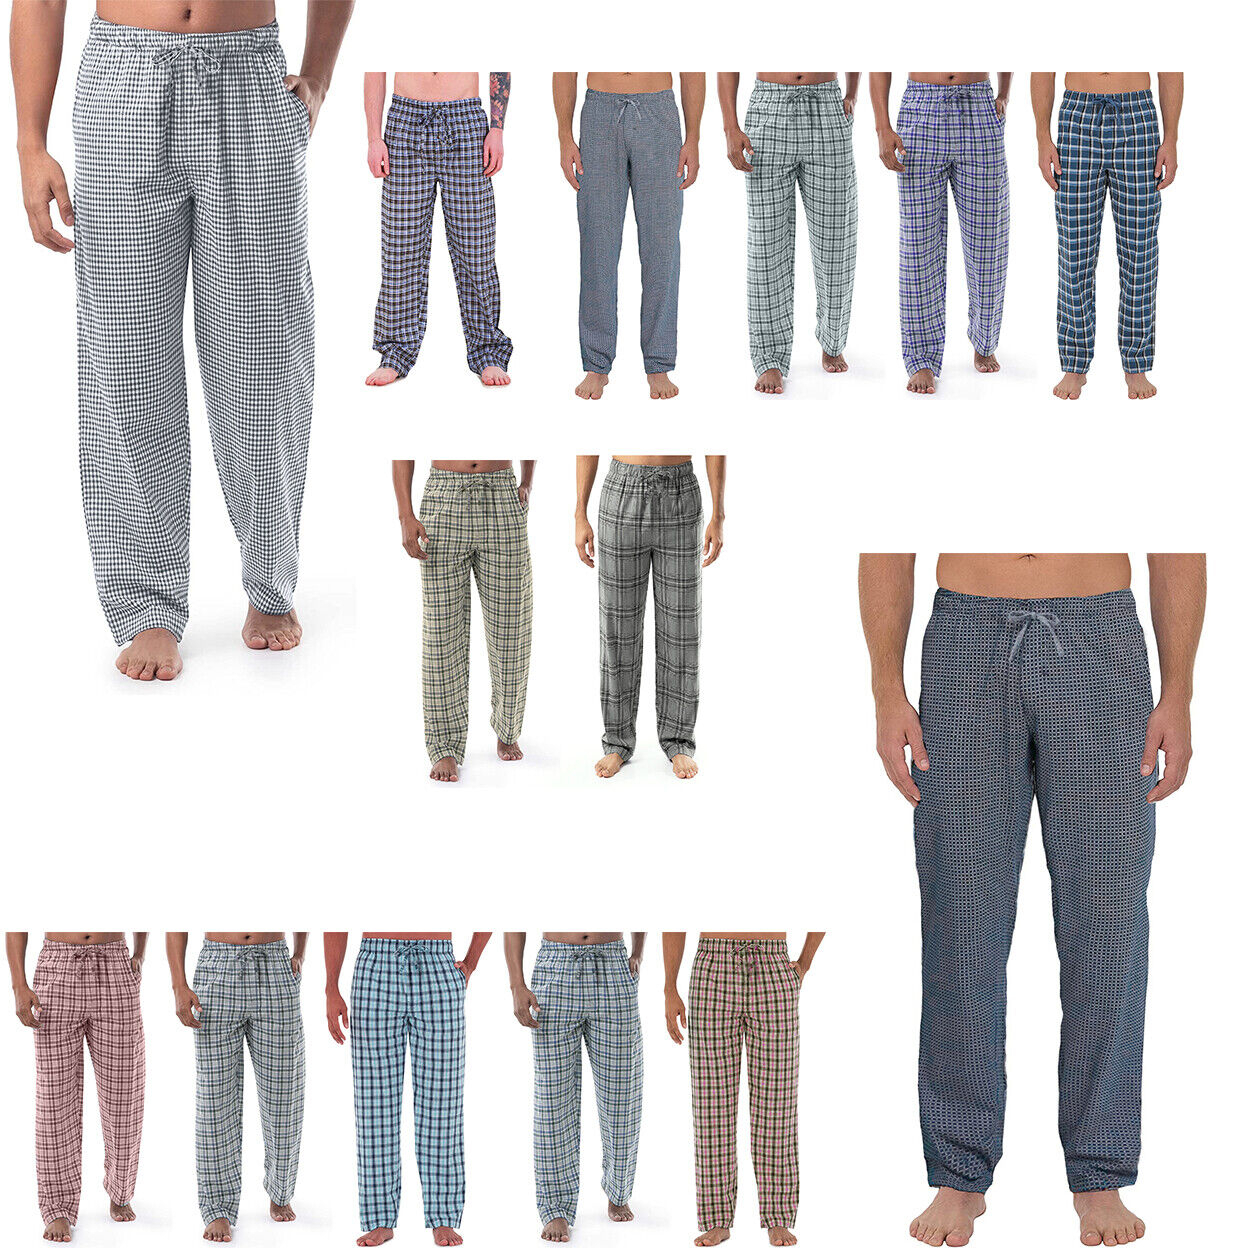 Multi-Pack: Men's Ultra-Soft Solid & Plaid Cotton Jersey Knit Comfy Sleep Lounge Pajama Pants - 1-pack Solid, Small